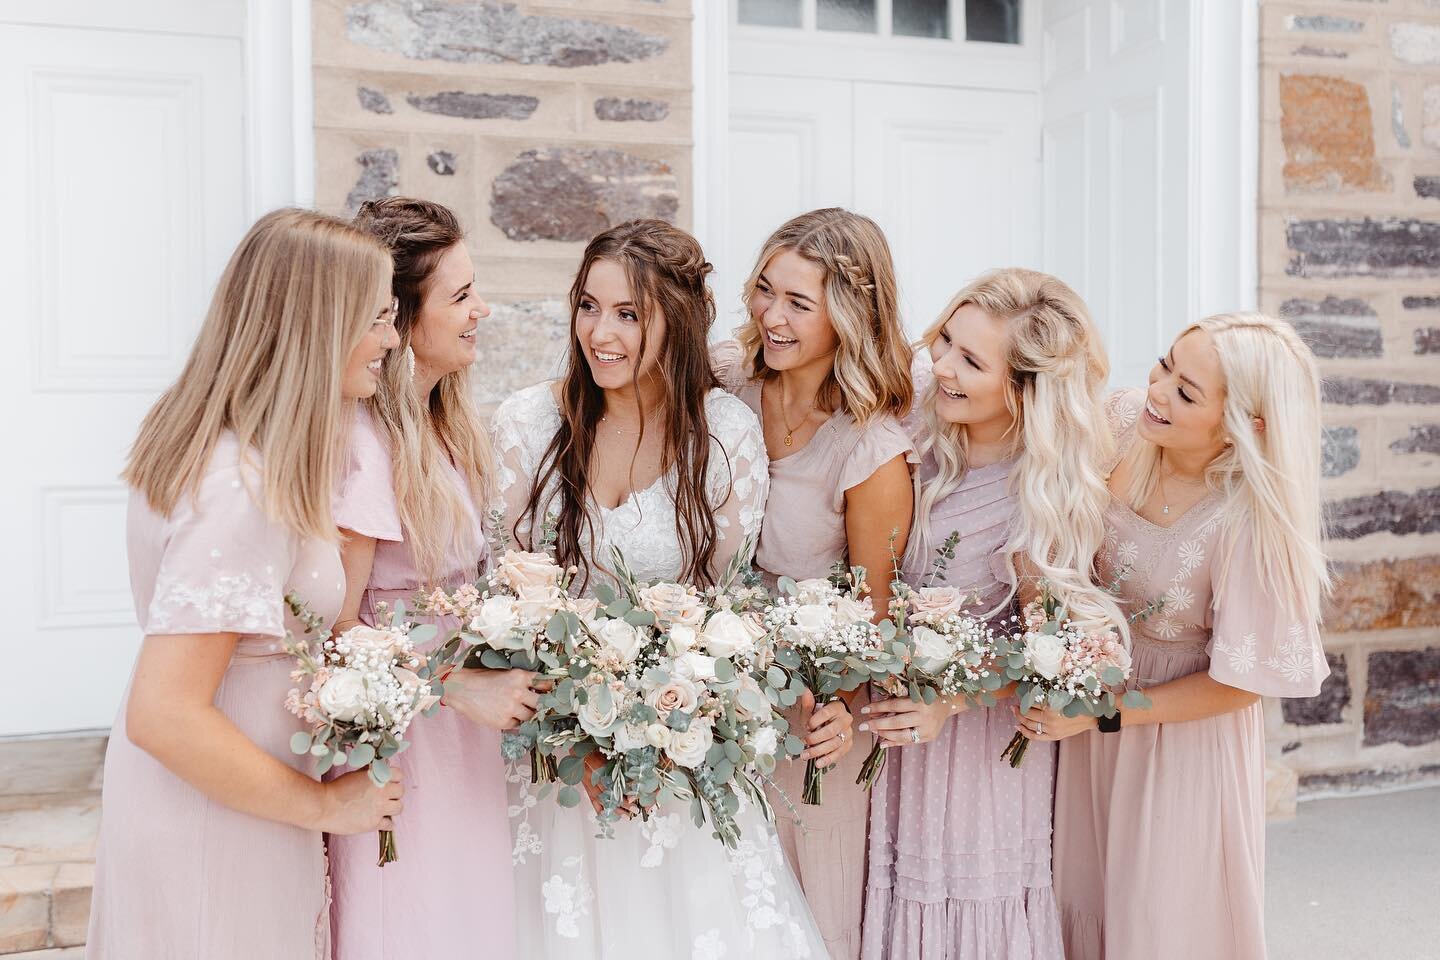 What is one way to make your wedding look high-end? FLOWERS! 🌸🌼 Having lots of flowers in bouquets, centerpieces and other decor can make any wedding look luxurious and very photogenic. 💗